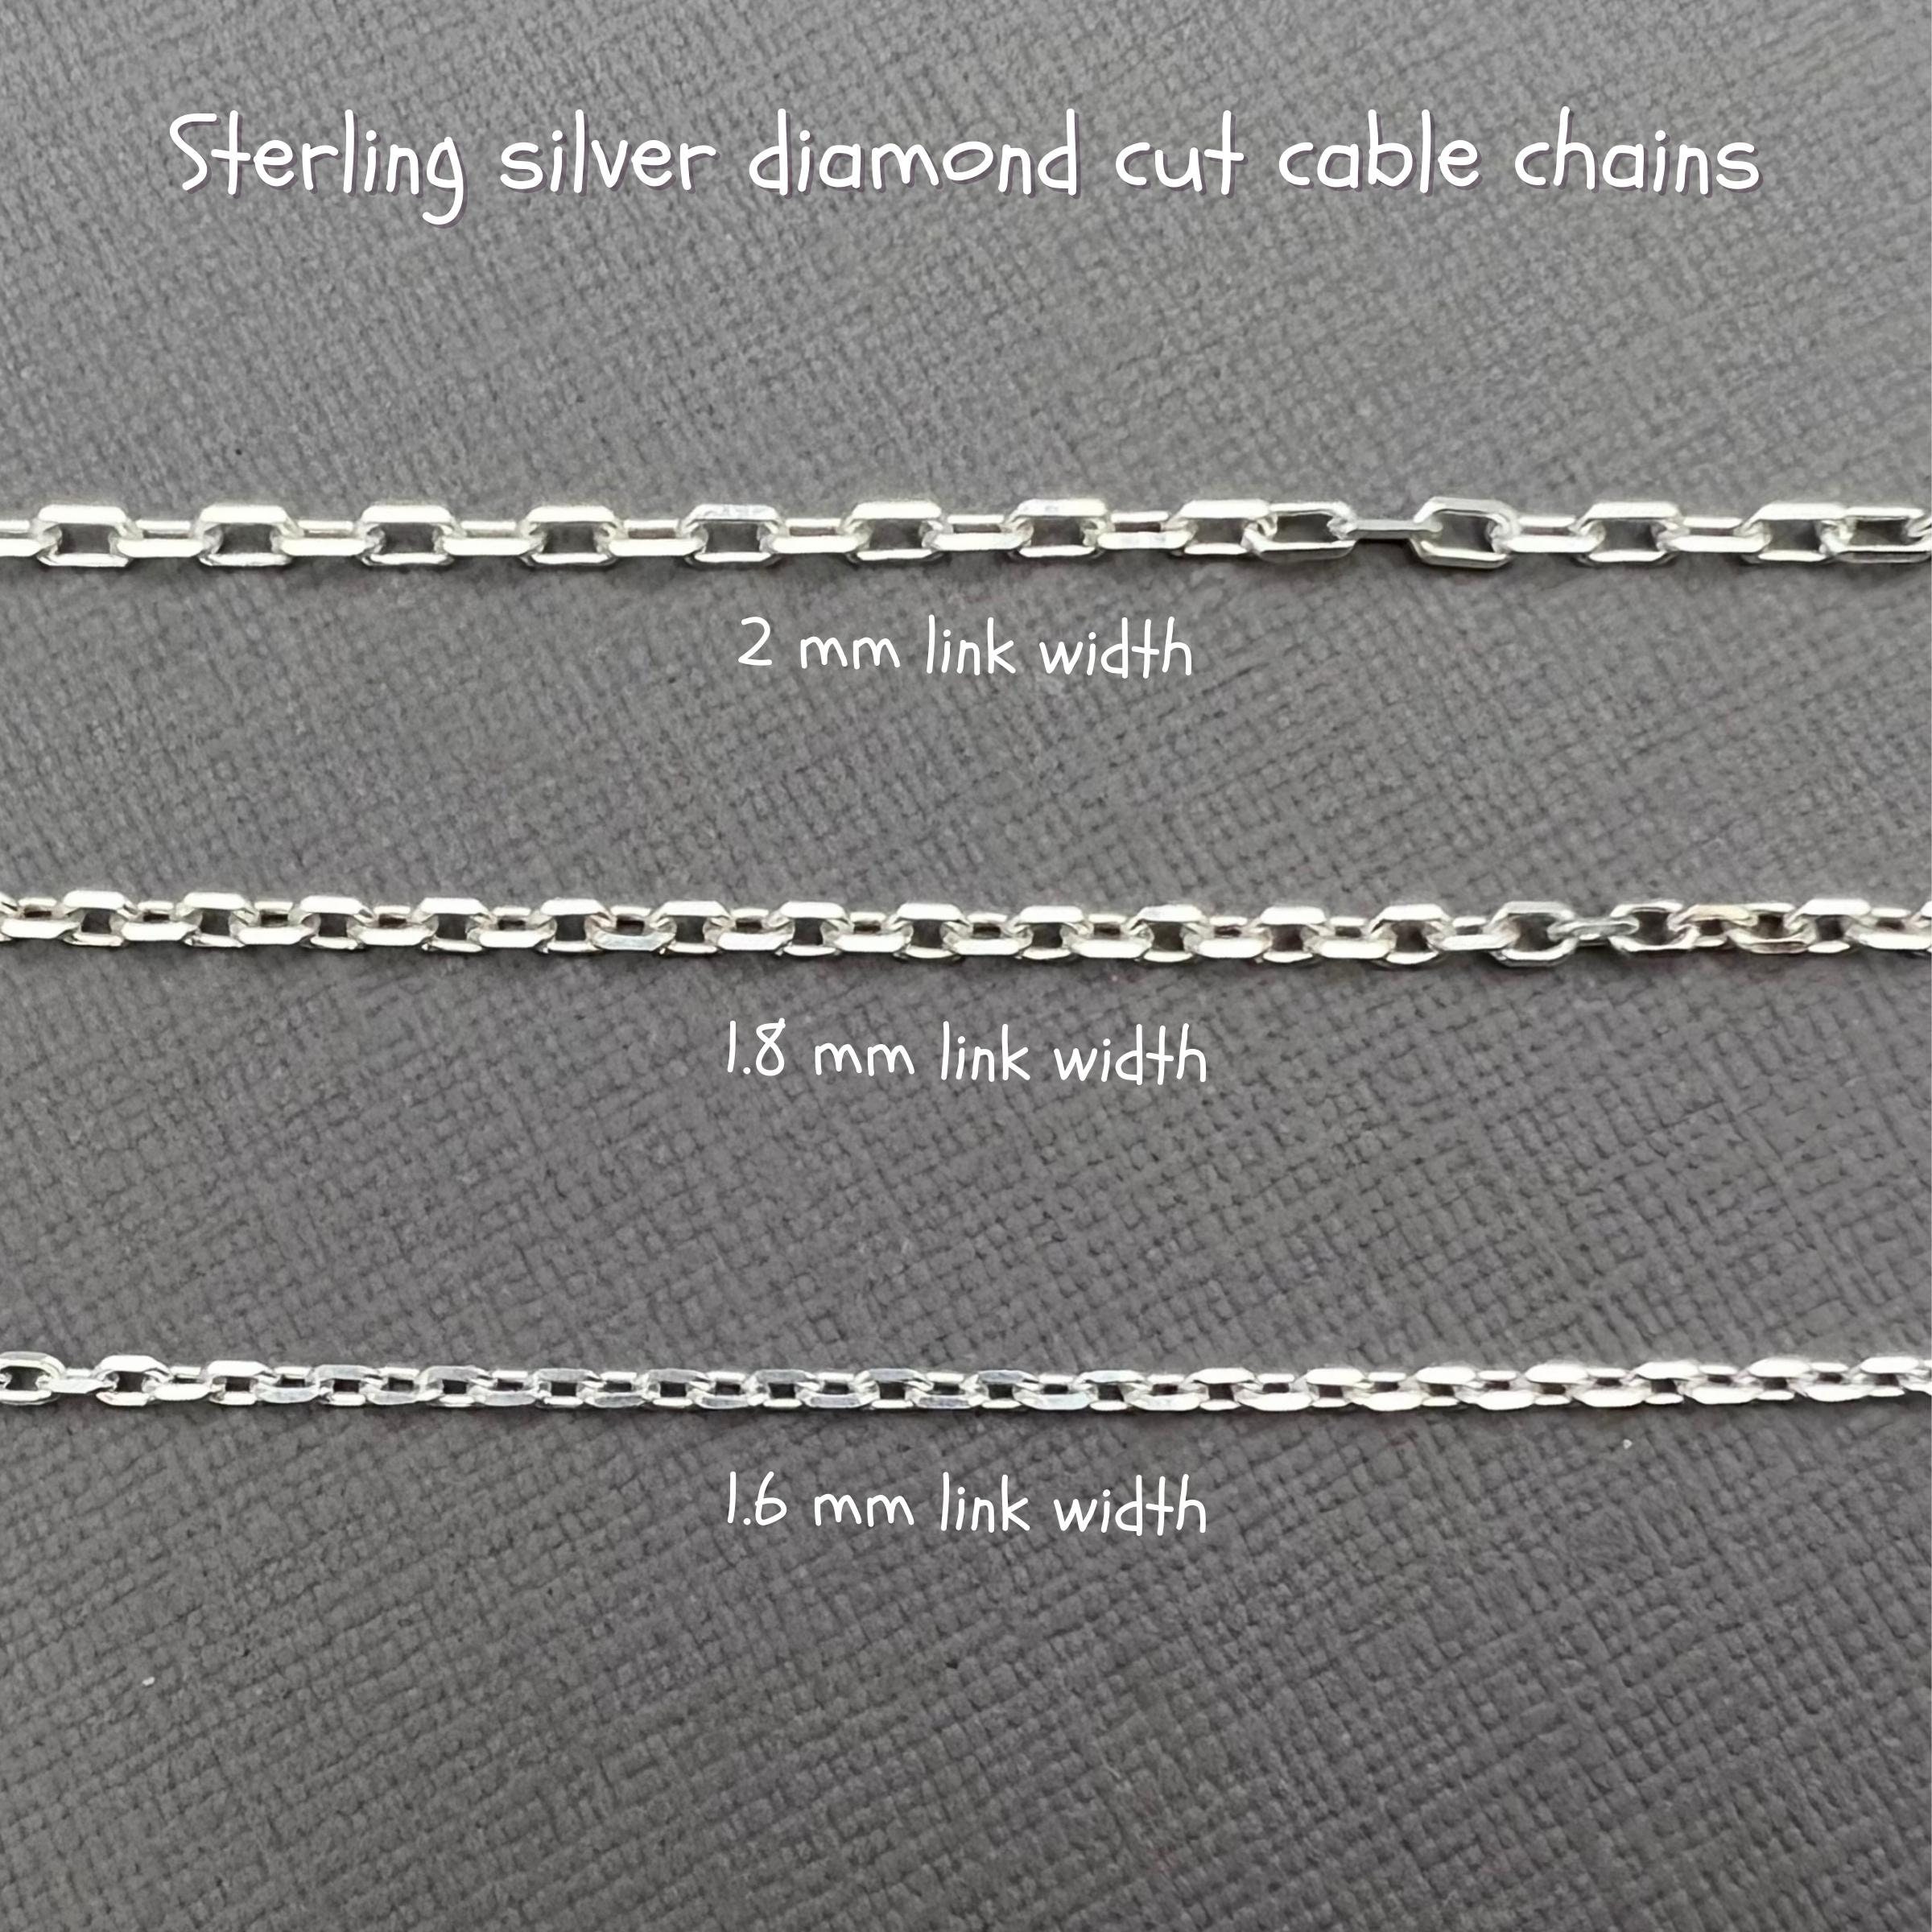 Boxer Craft House Silver Metal - Purse Chain Flat 40 inch